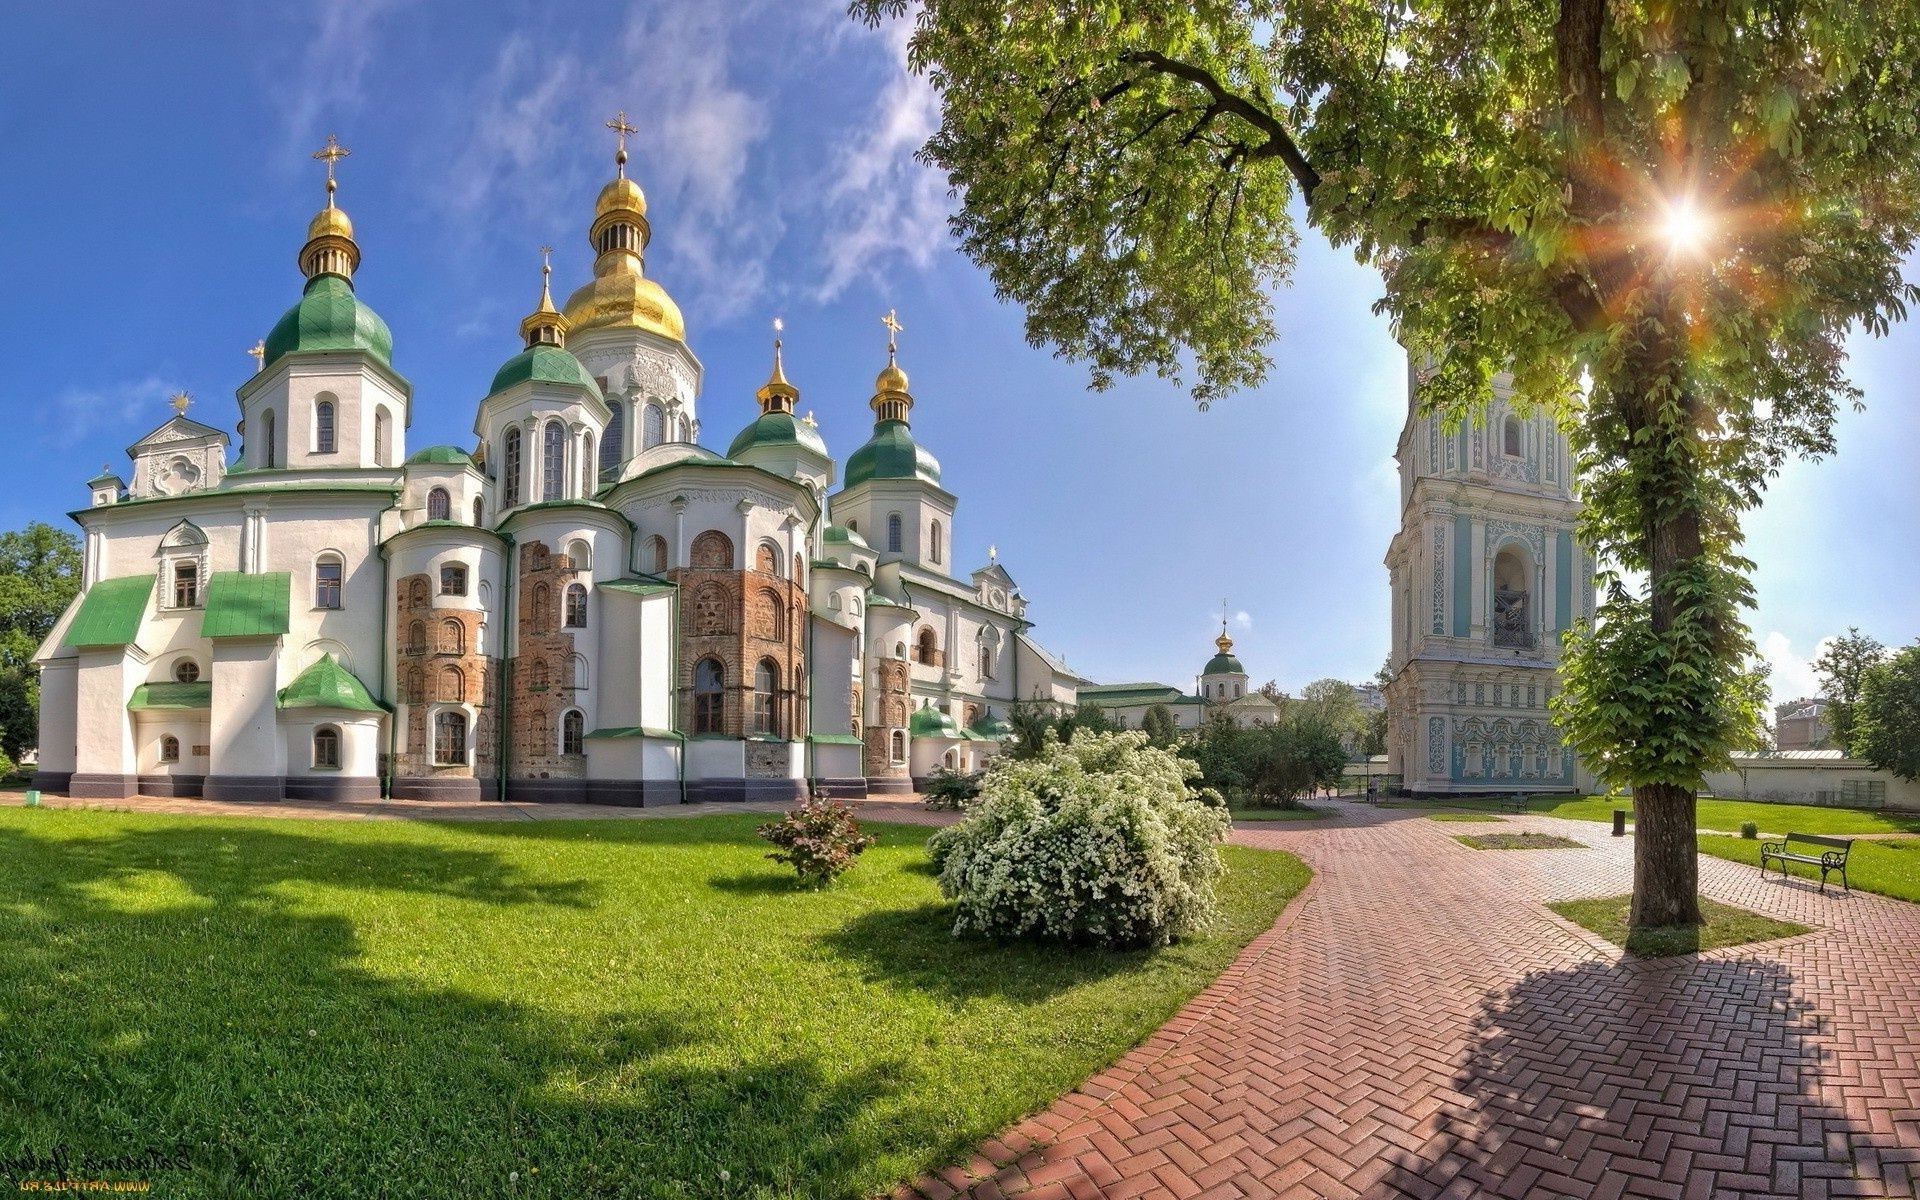 ancient architecture architecture building church travel sky old city castle religion dome culture tourism exterior famous orthodox cathedral tower landmark historic sight